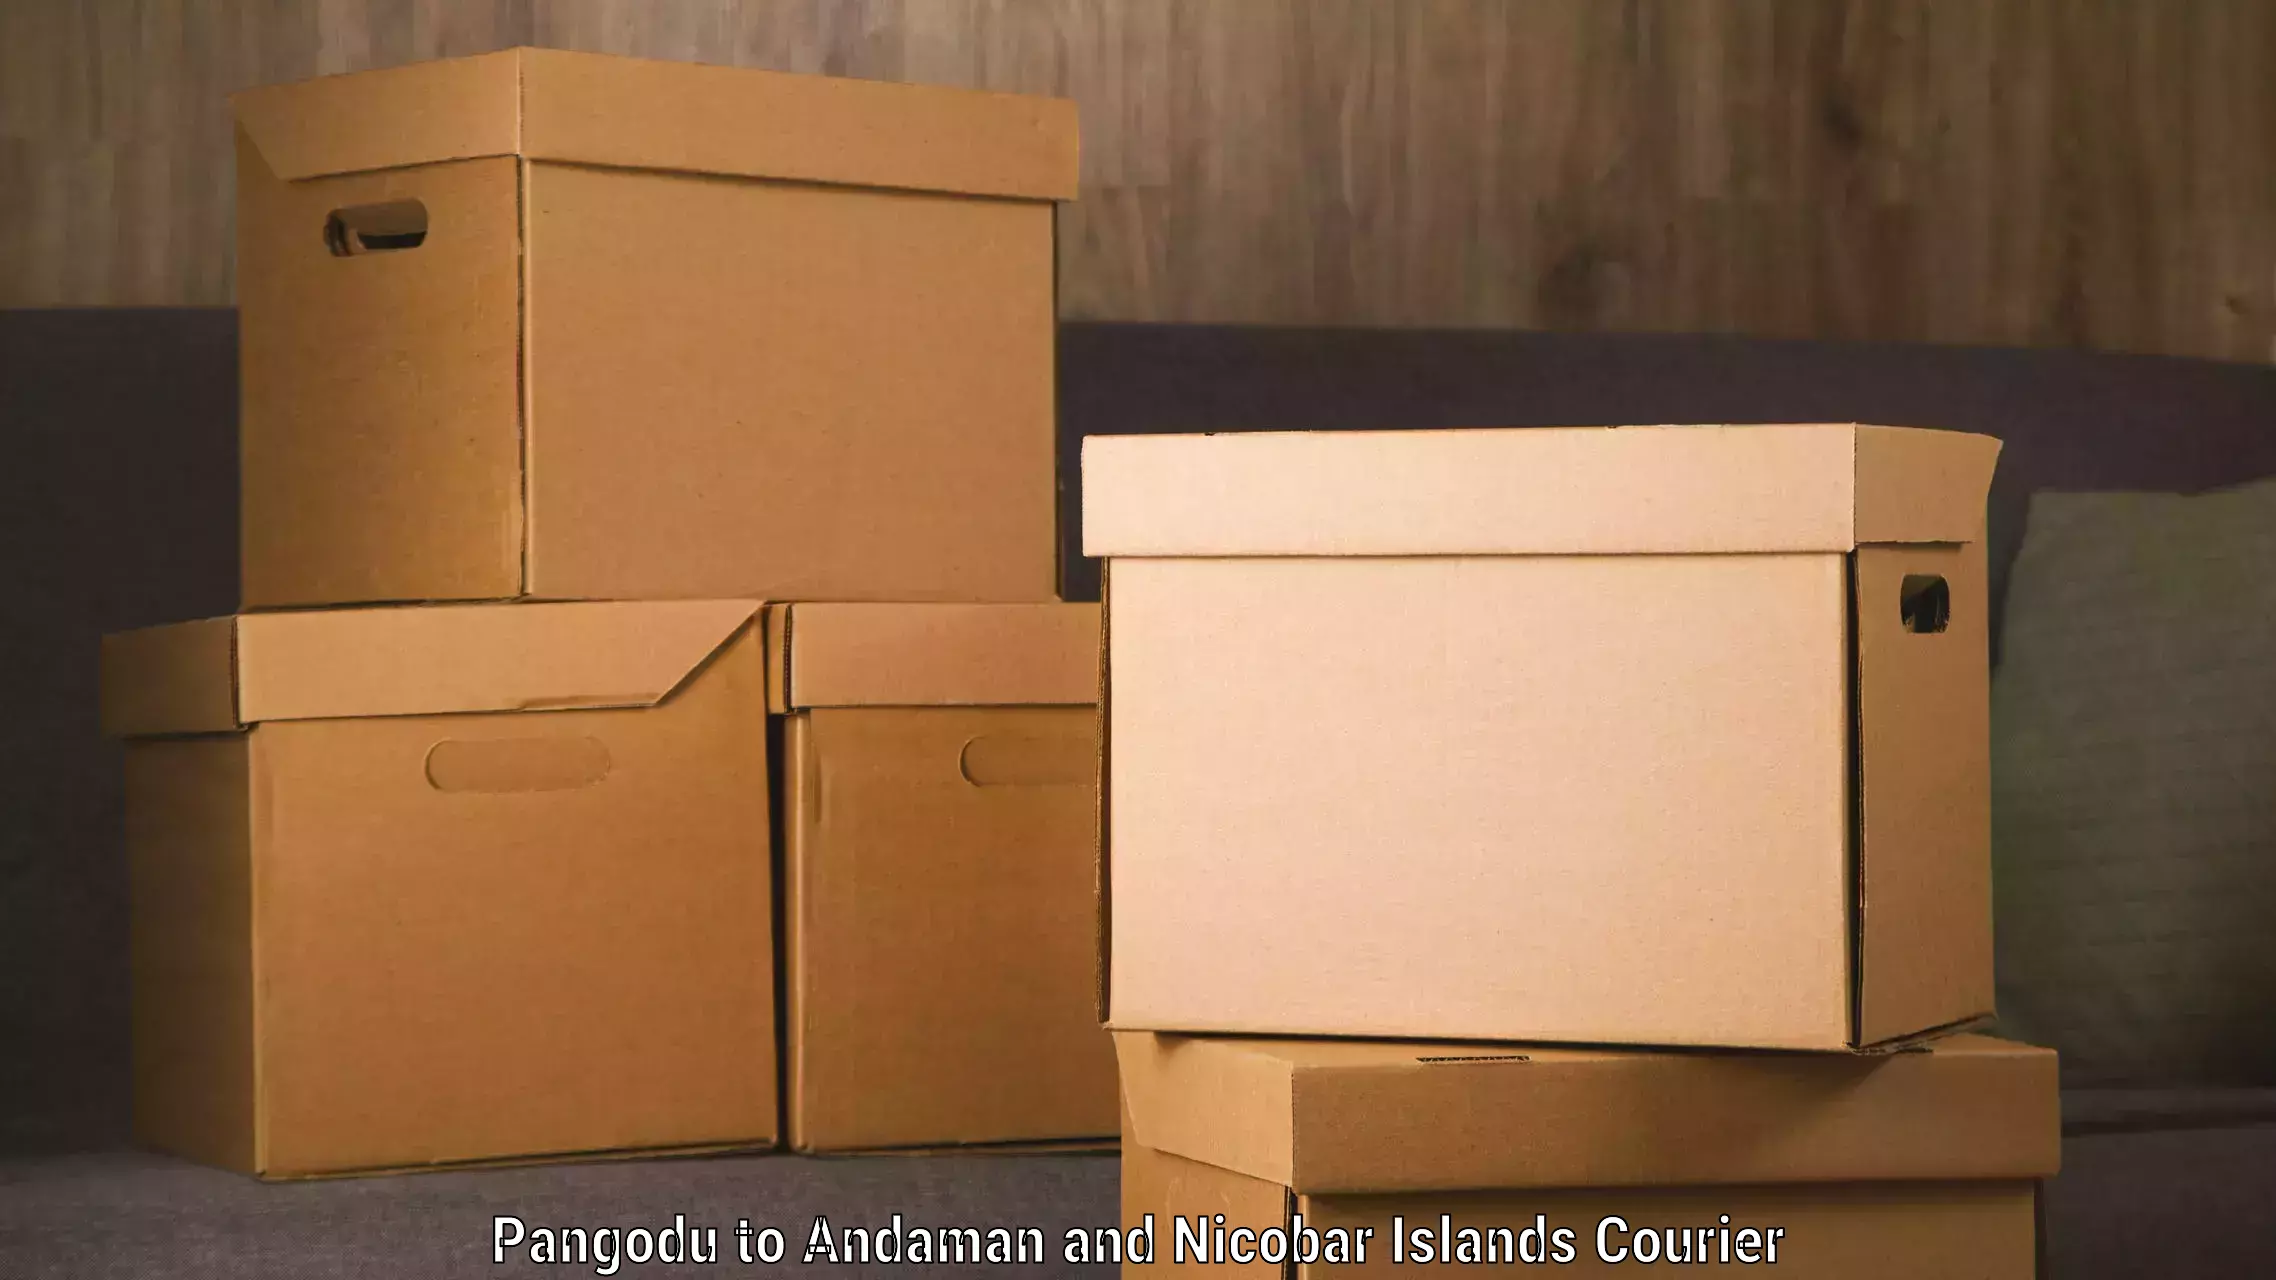 Courier service comparison Pangodu to Andaman and Nicobar Islands